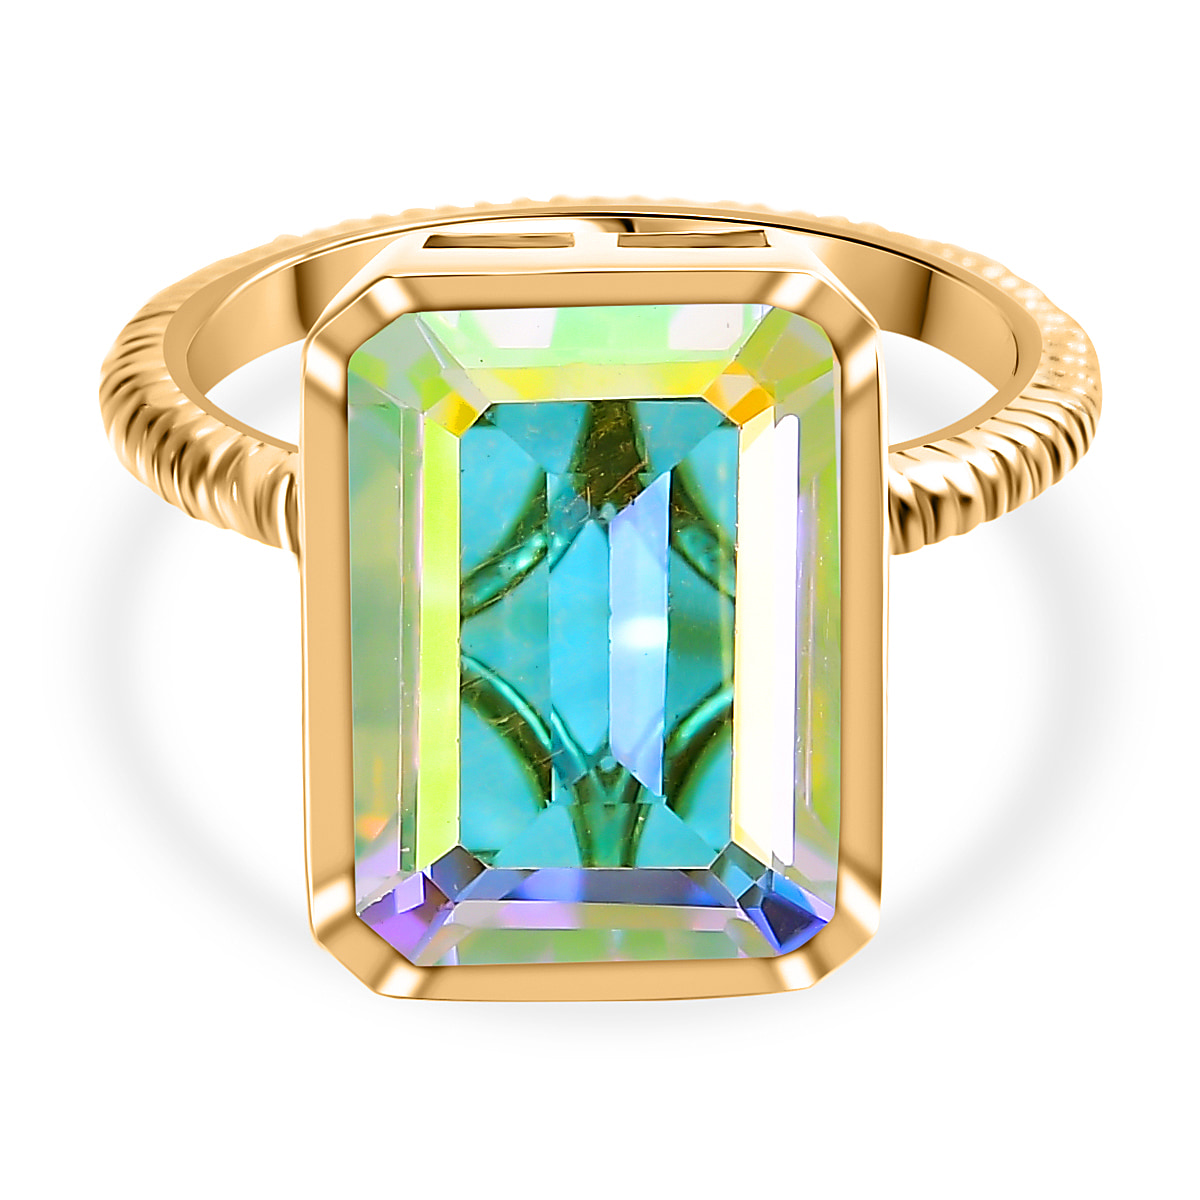 Mercury Mystic Topaz Solitaire Ring in 18K Yellow Gold Vermeil Plated Sterling Silver 8.60 ct